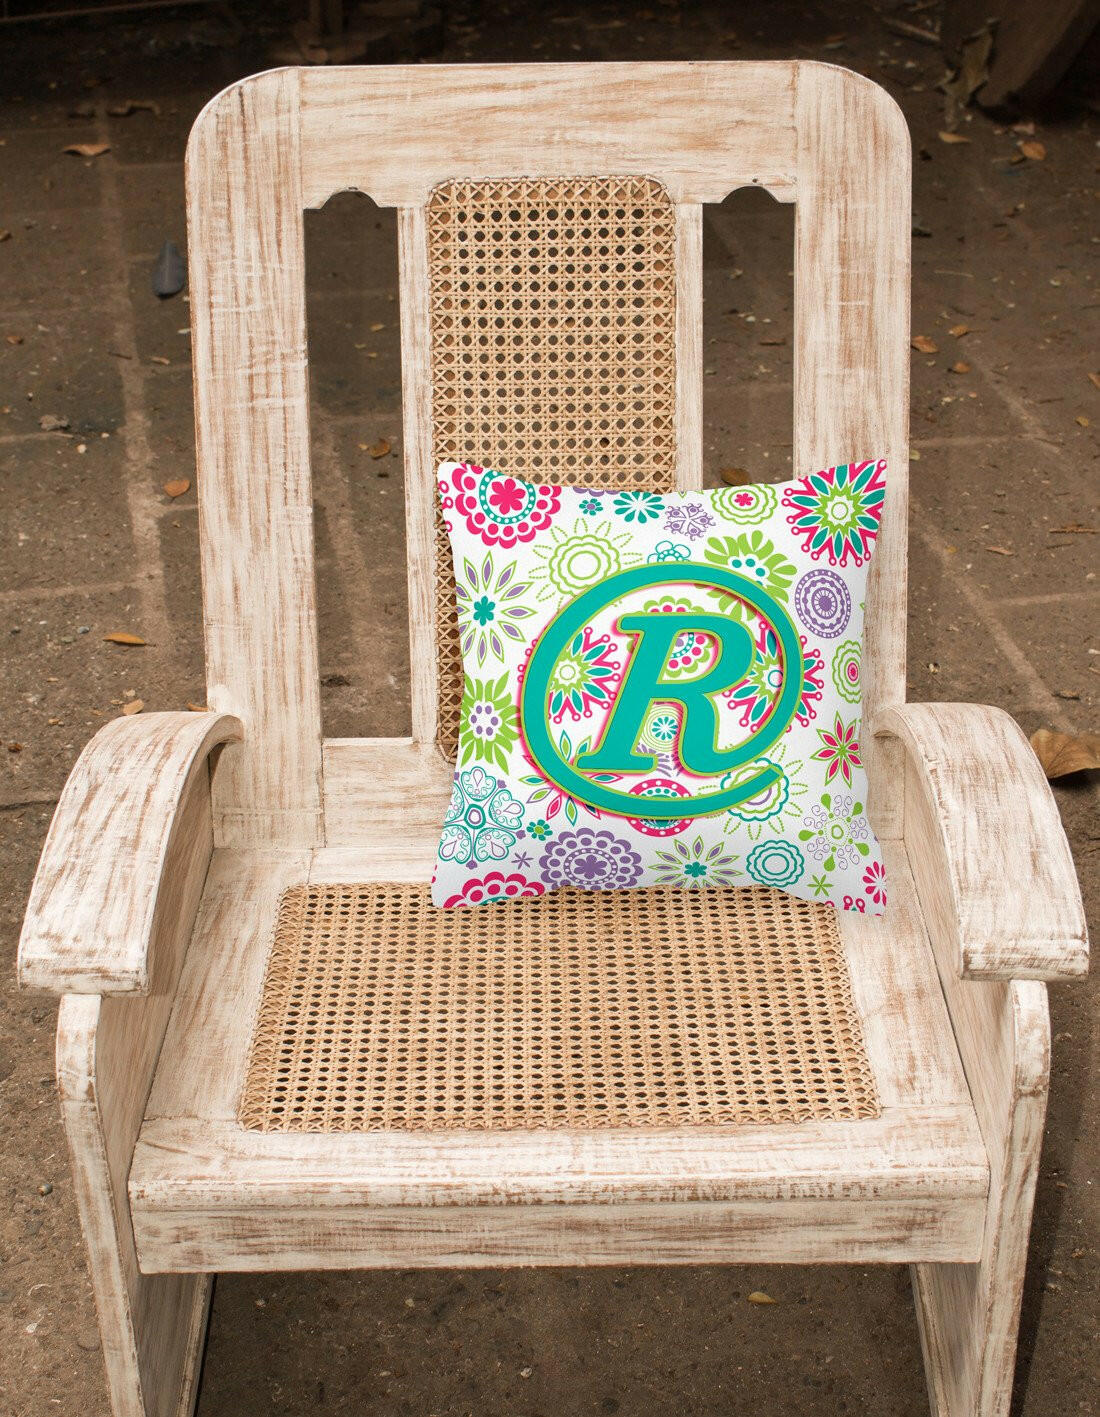 Letter R Flowers Pink Teal Green Initial Canvas Fabric Decorative Pillow CJ2011-RPW1414 by Caroline's Treasures